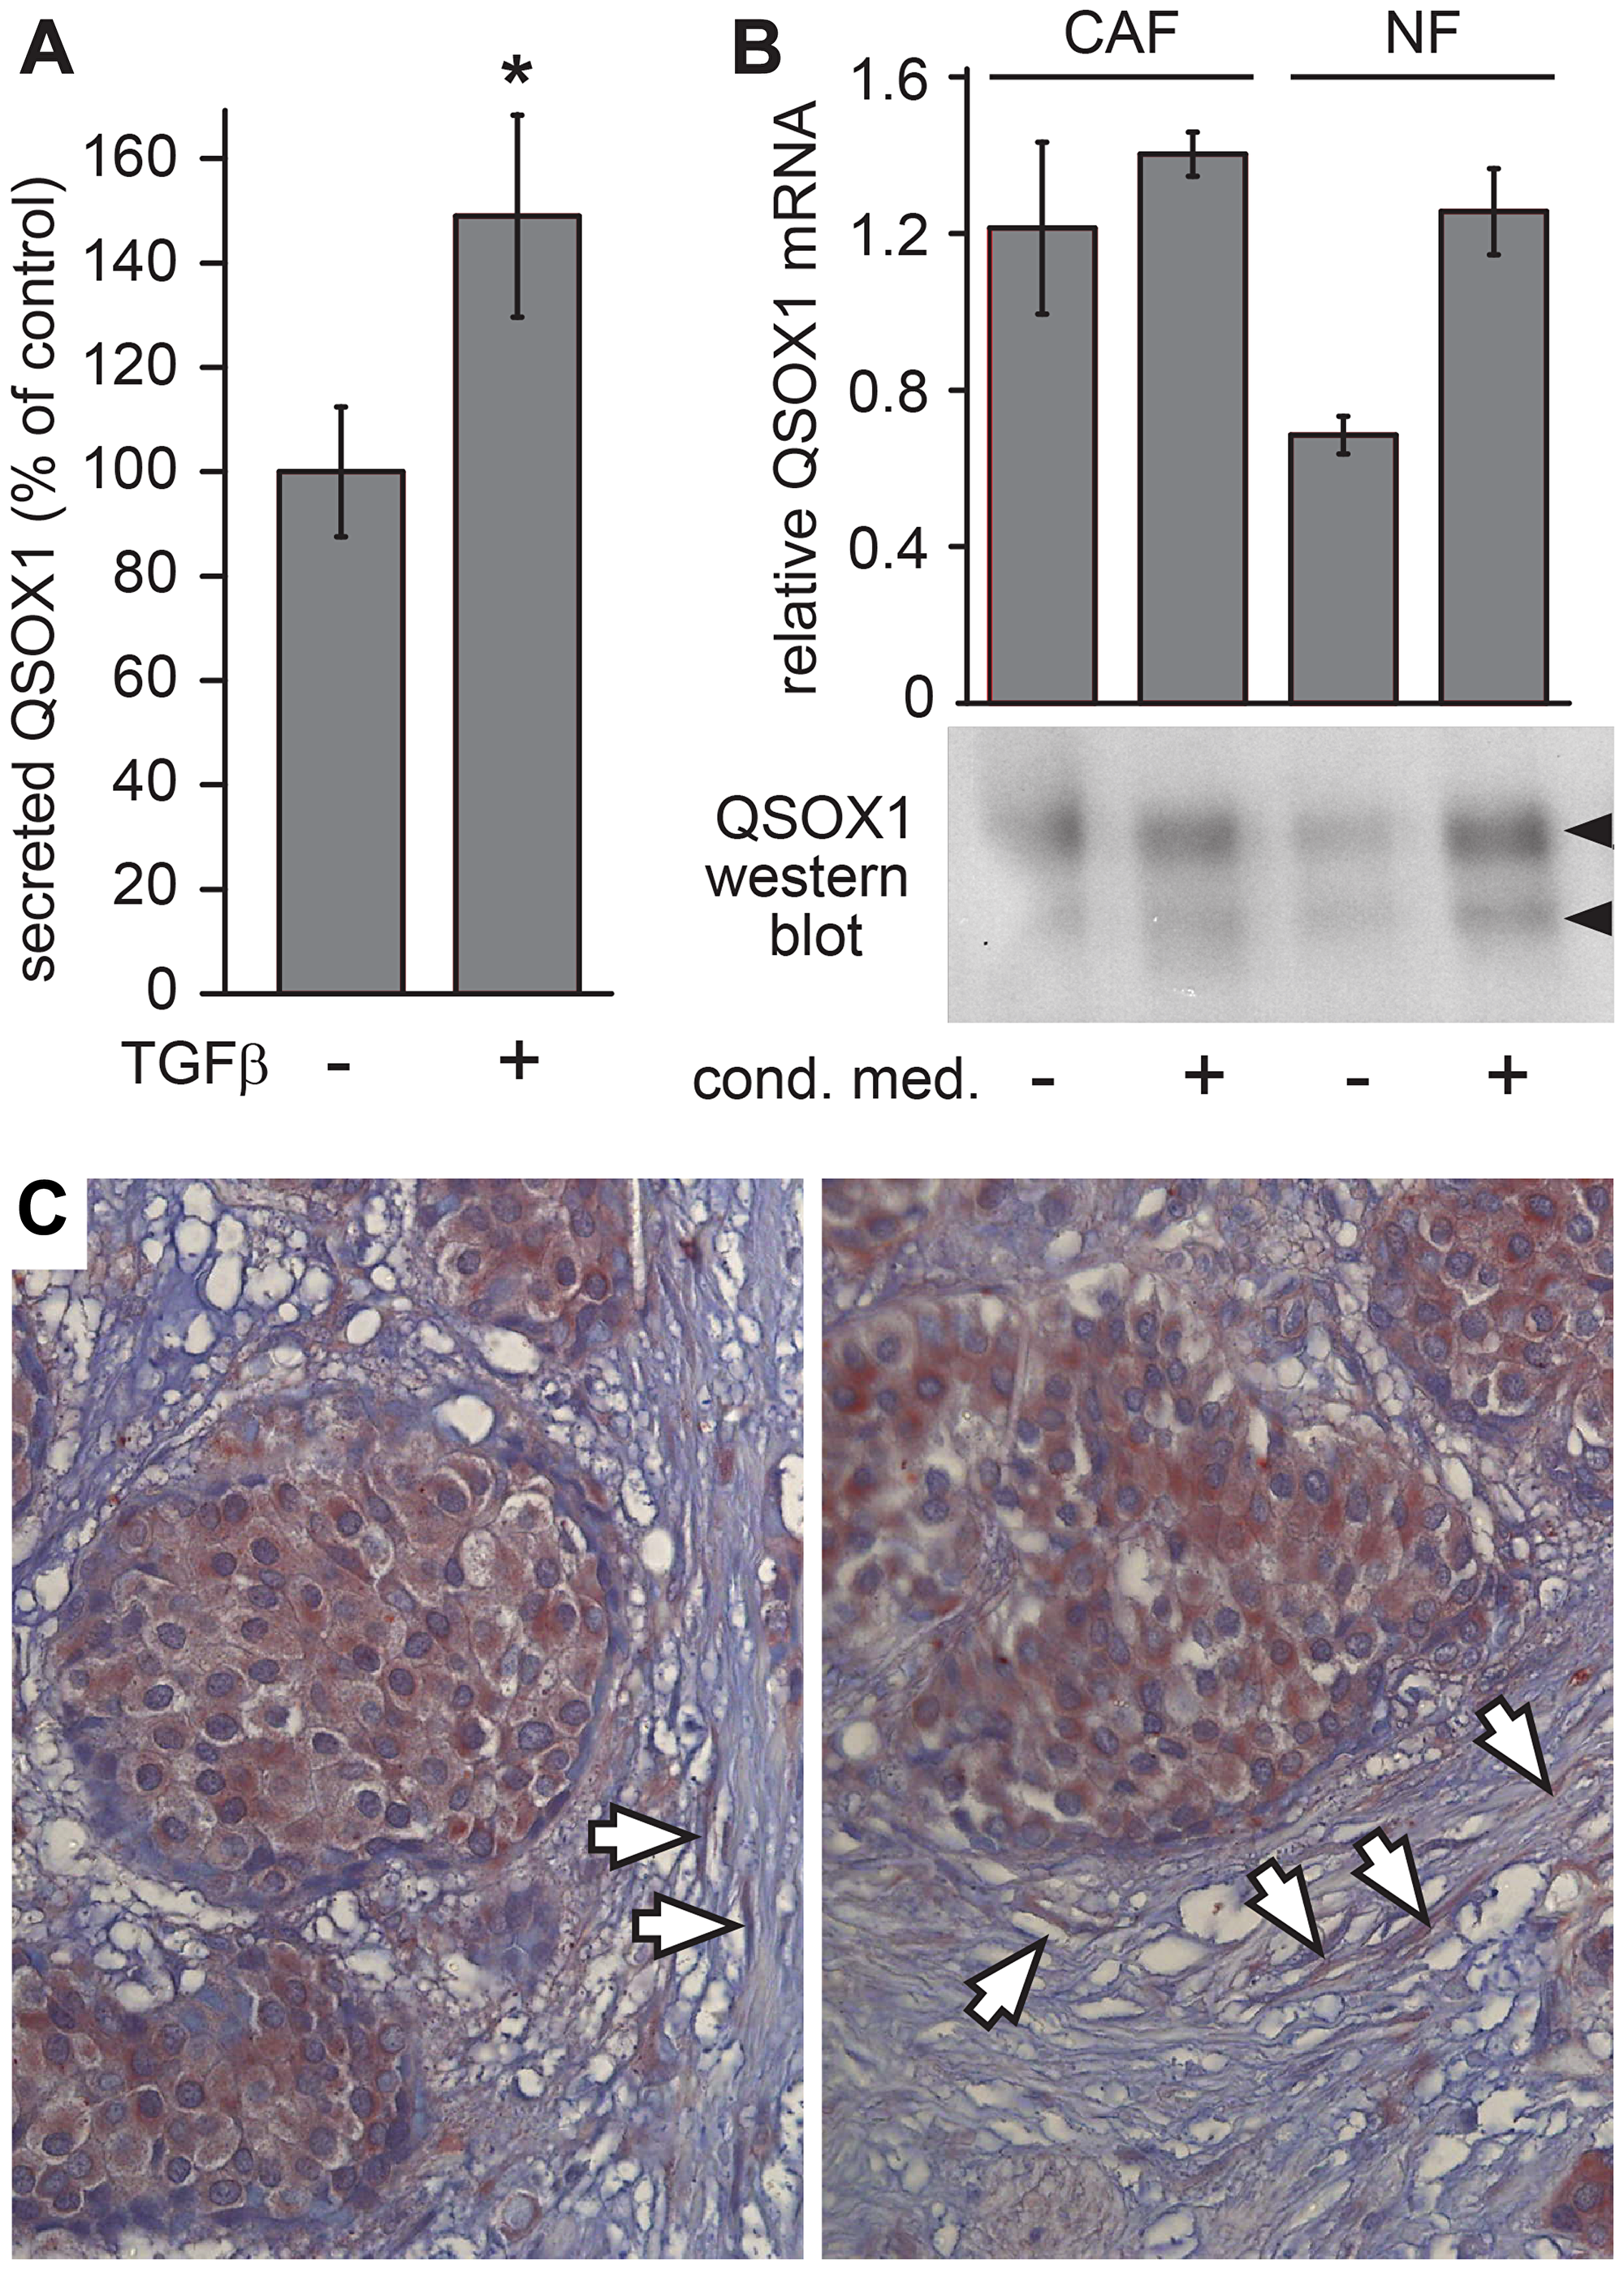 QSOX1 production by tumor-associated fibroblasts.